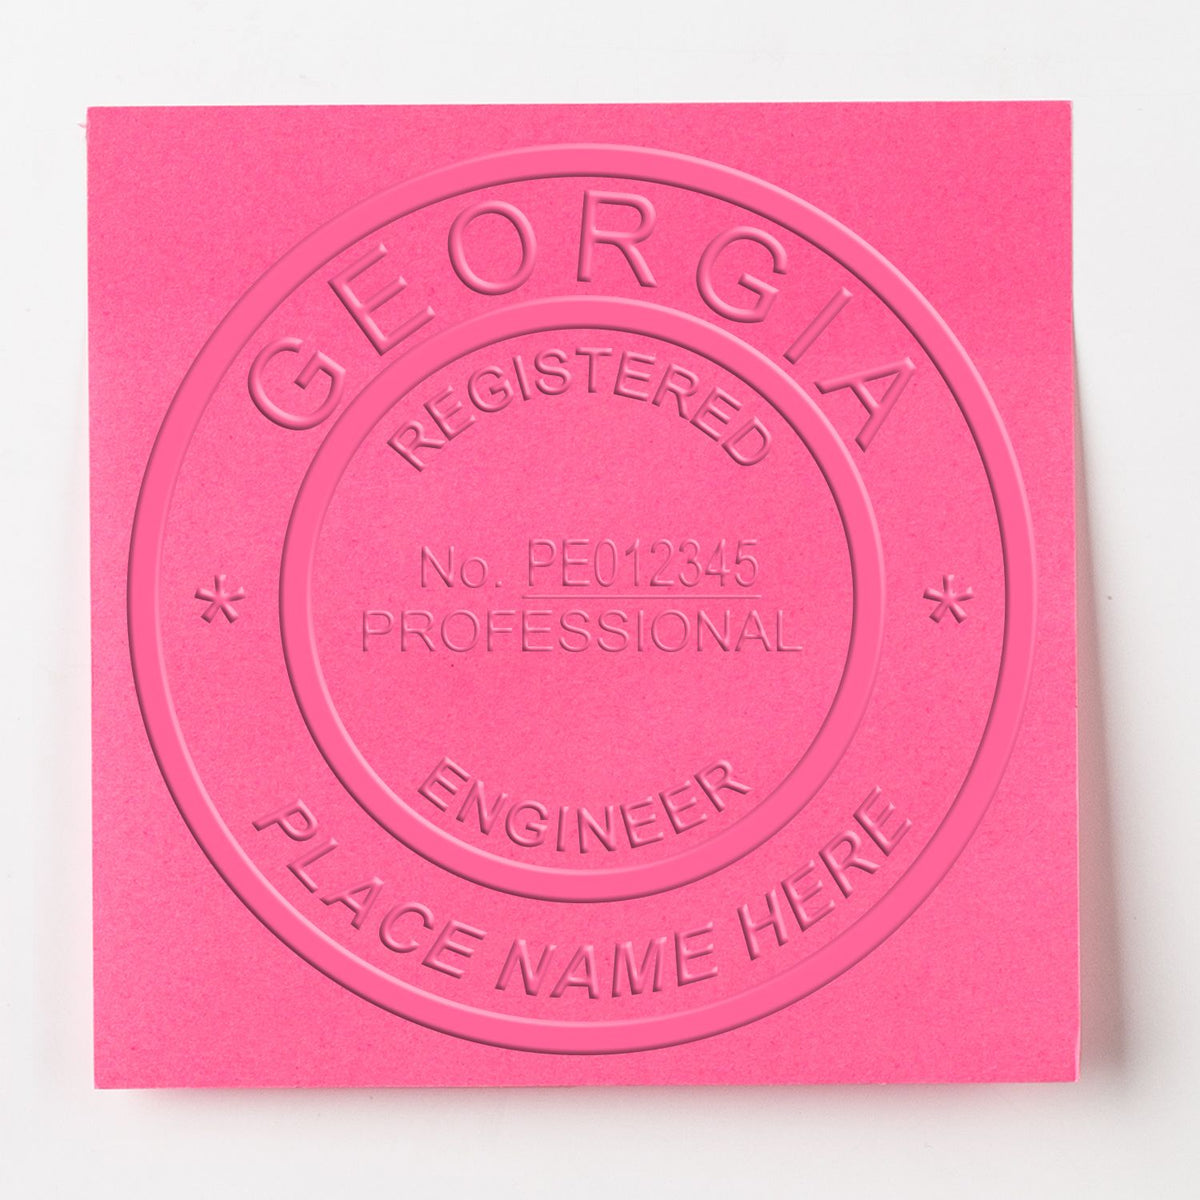 This paper is stamped with a sample imprint of the Georgia Engineer Desk Seal, signifying its quality and reliability.